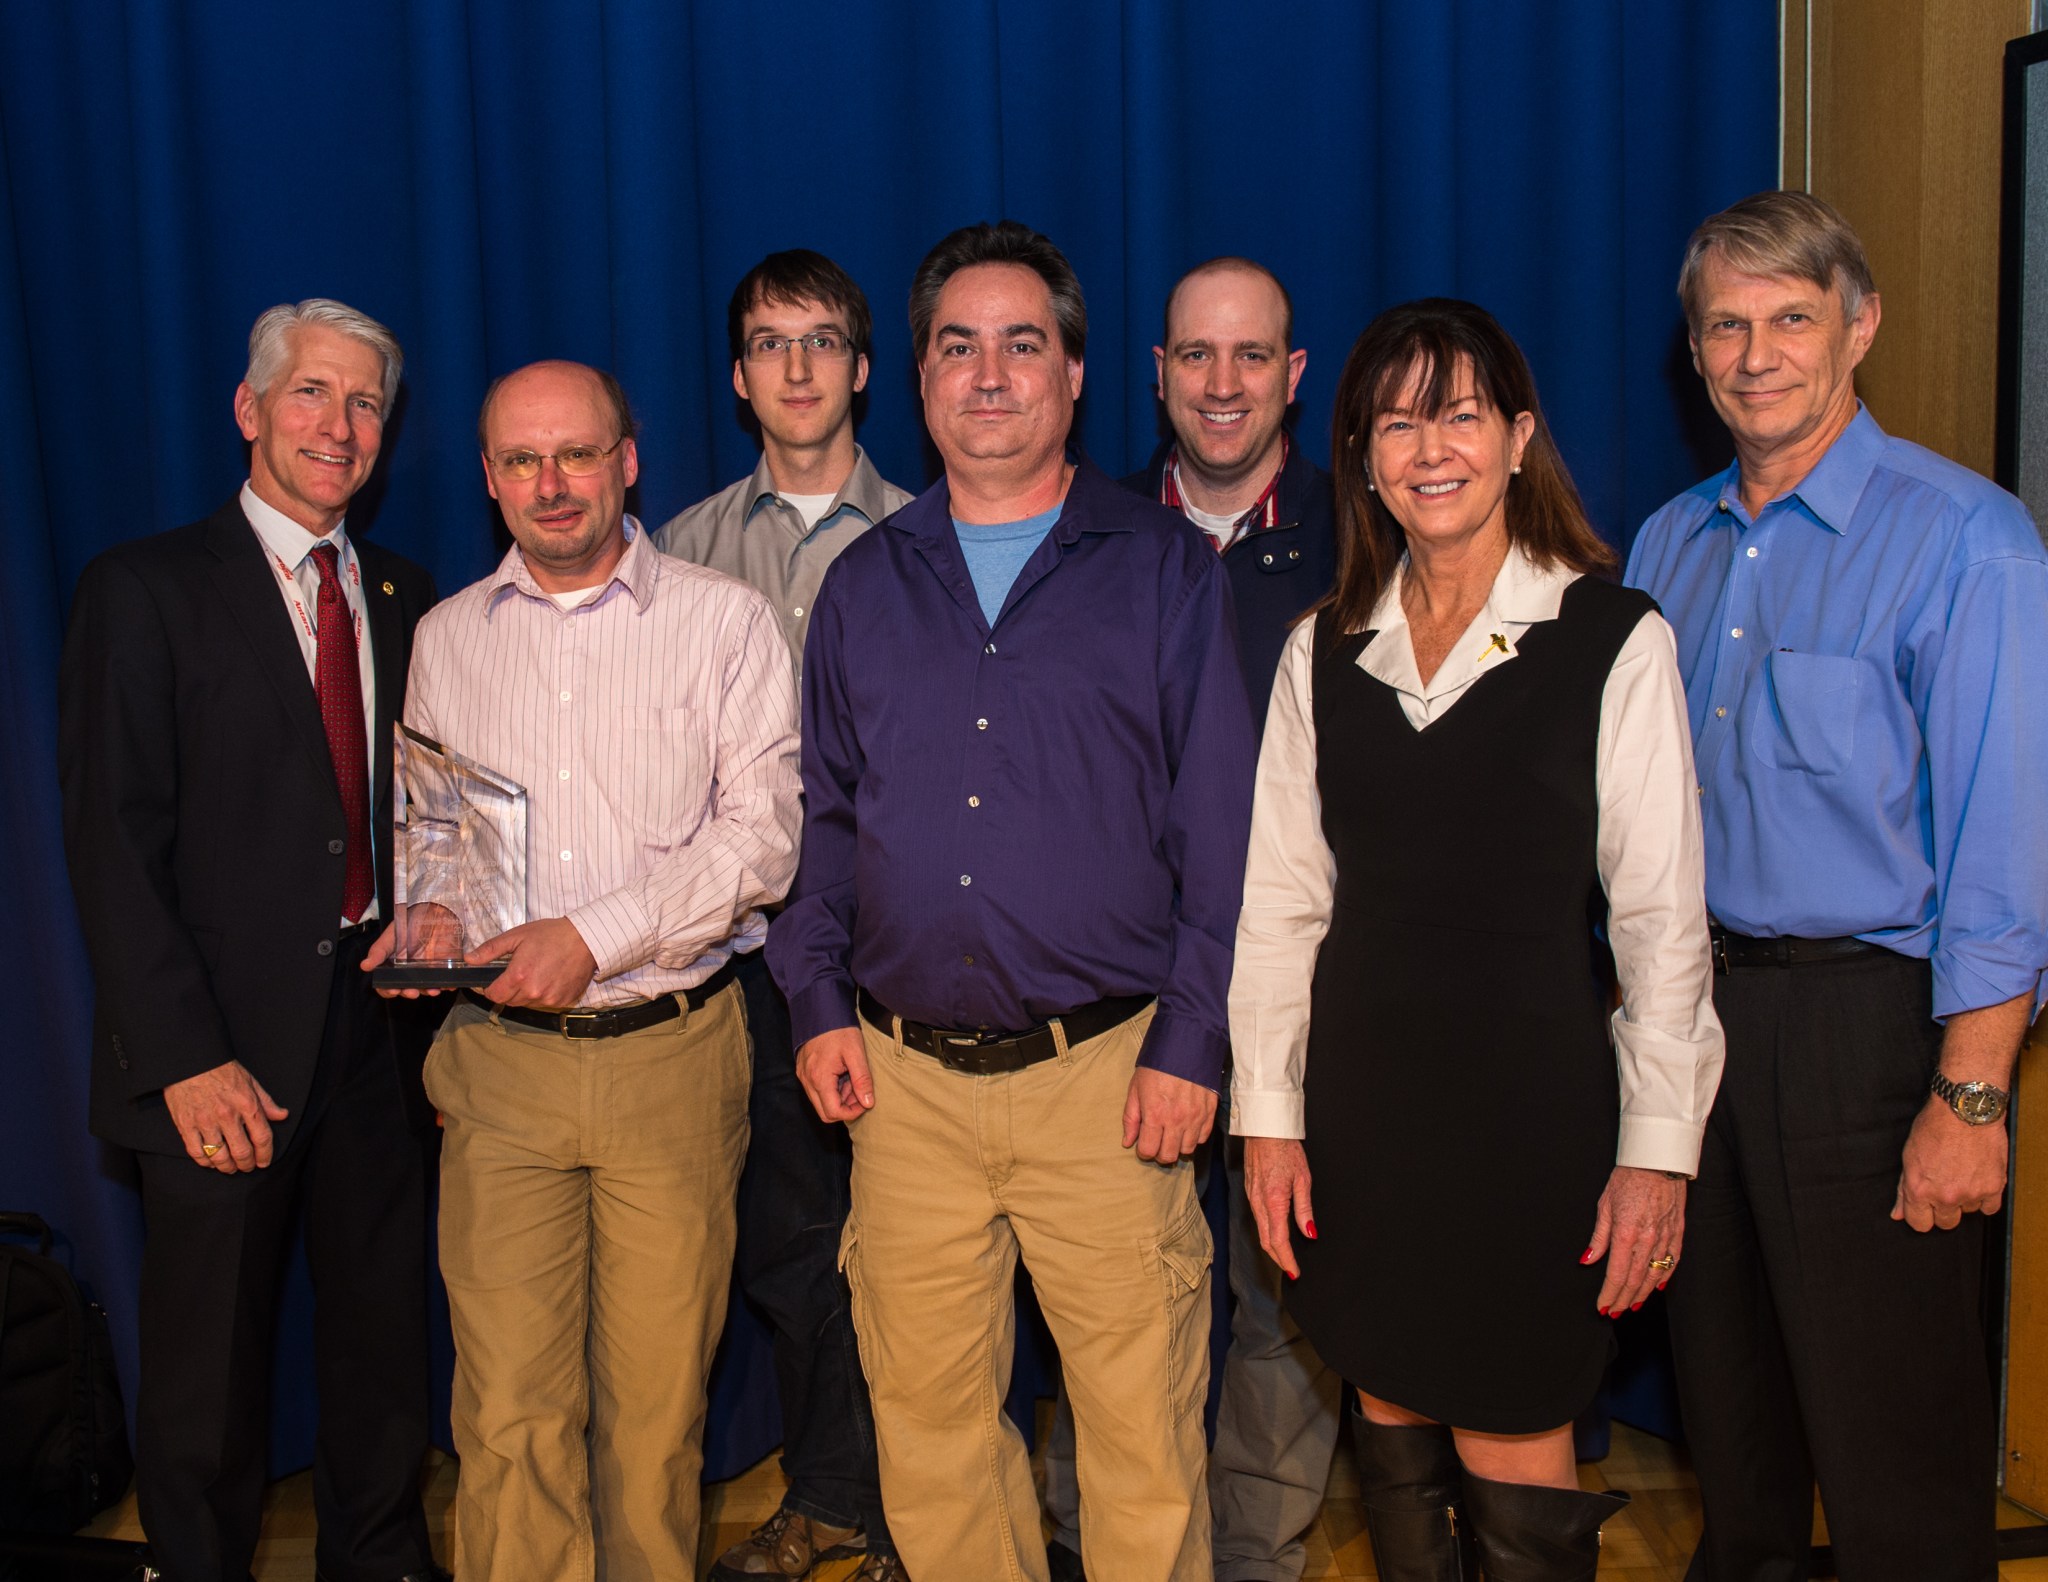 Six men and one woman stand together. The man second to the left wears a pink dress shirt, tan pants and is holding the "Innovator of the year" award